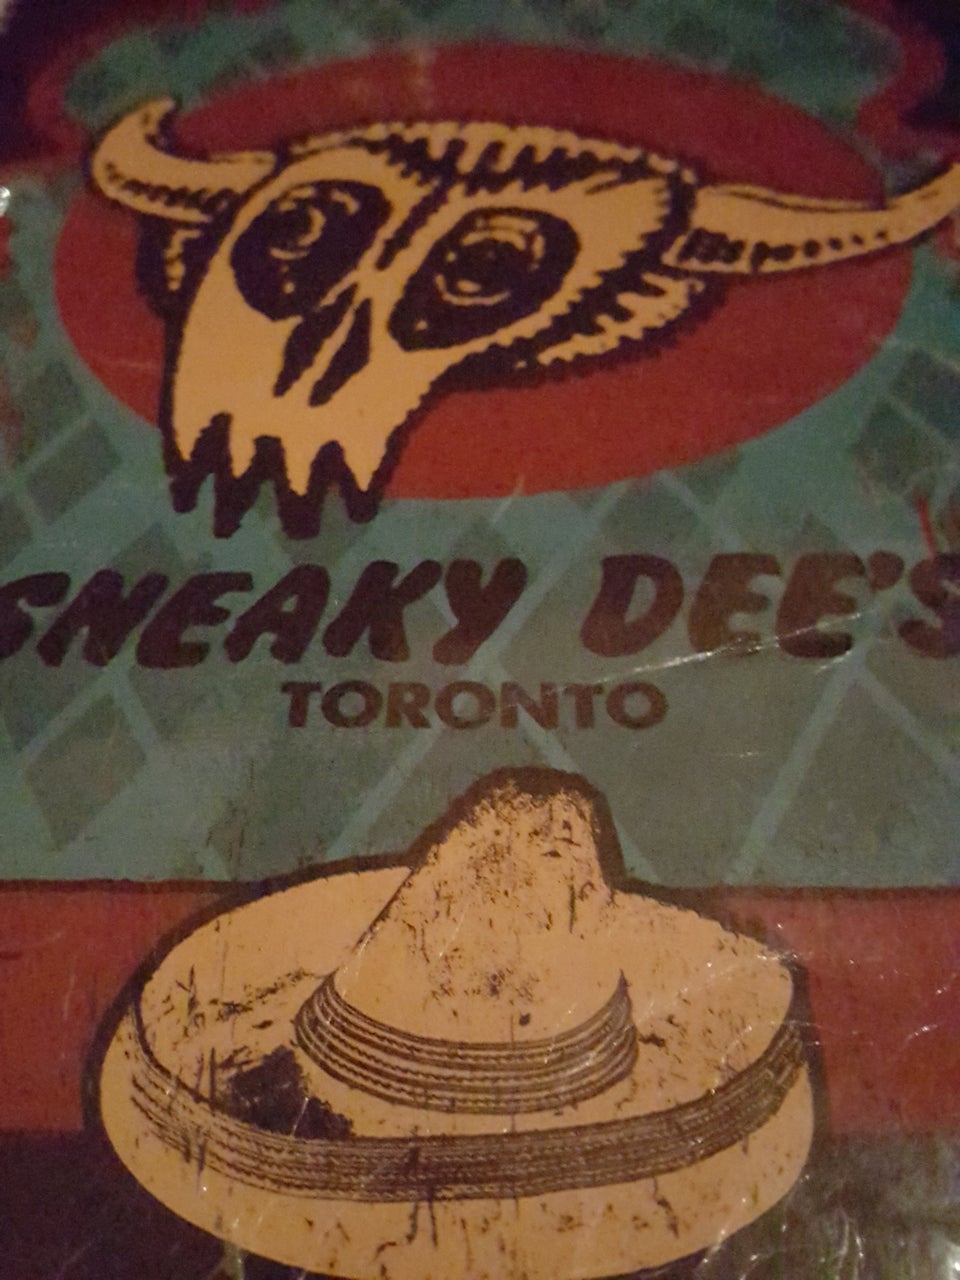 Photo of Sneaky Dee's